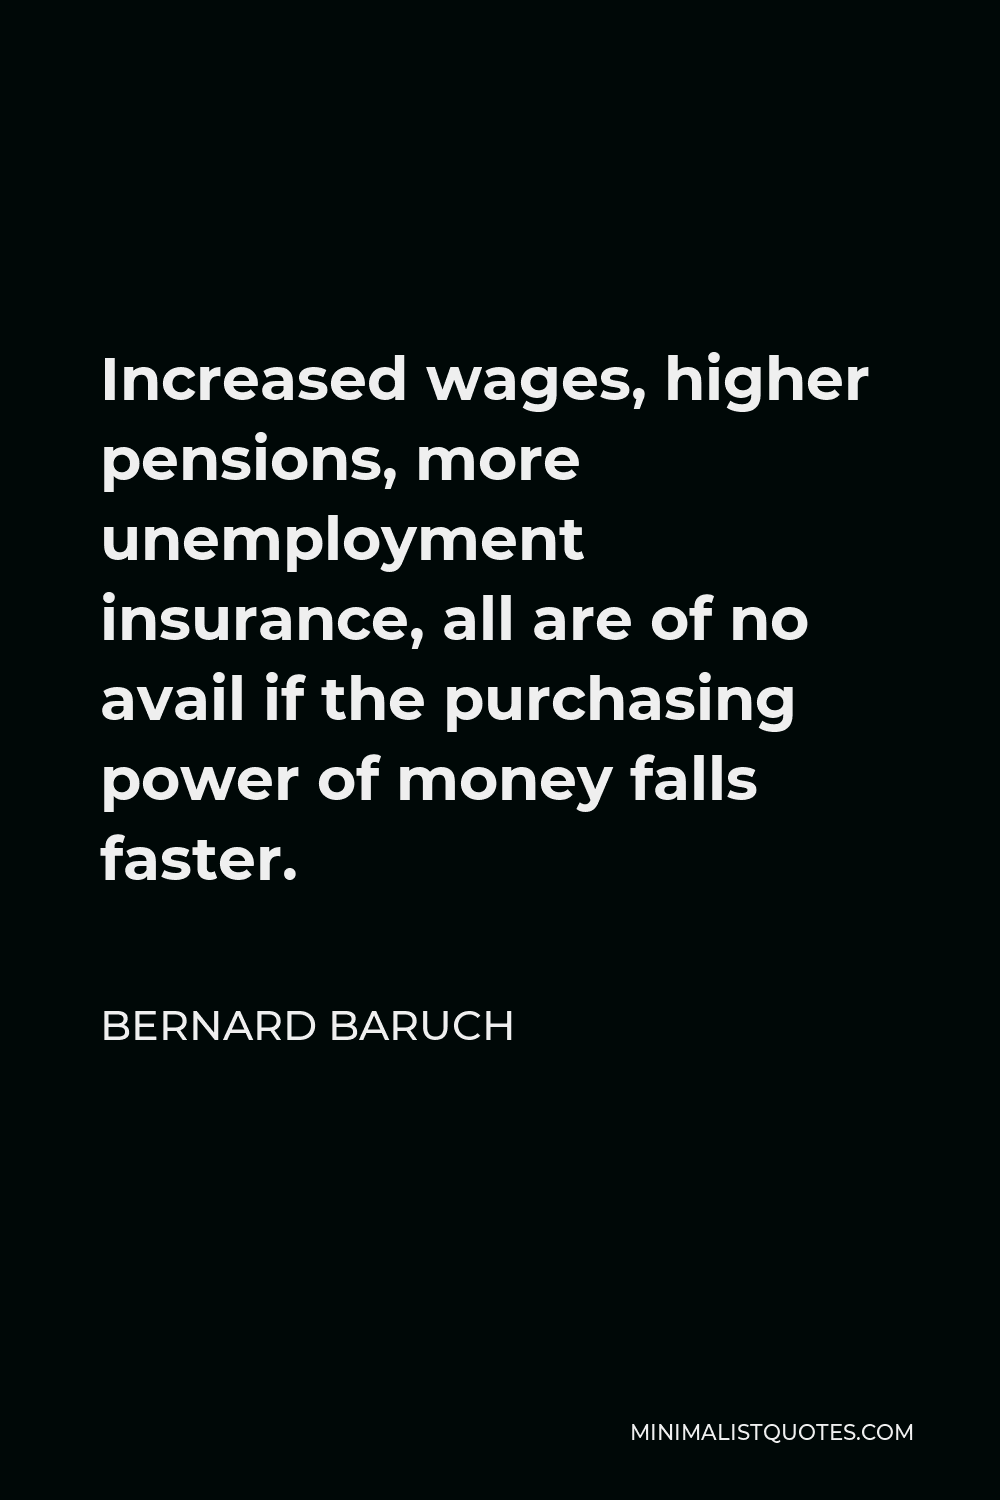 Bernard Baruch Quote - Increased wages, higher pensions, more unemployment insurance, all are of no avail if the purchasing power of money falls faster.